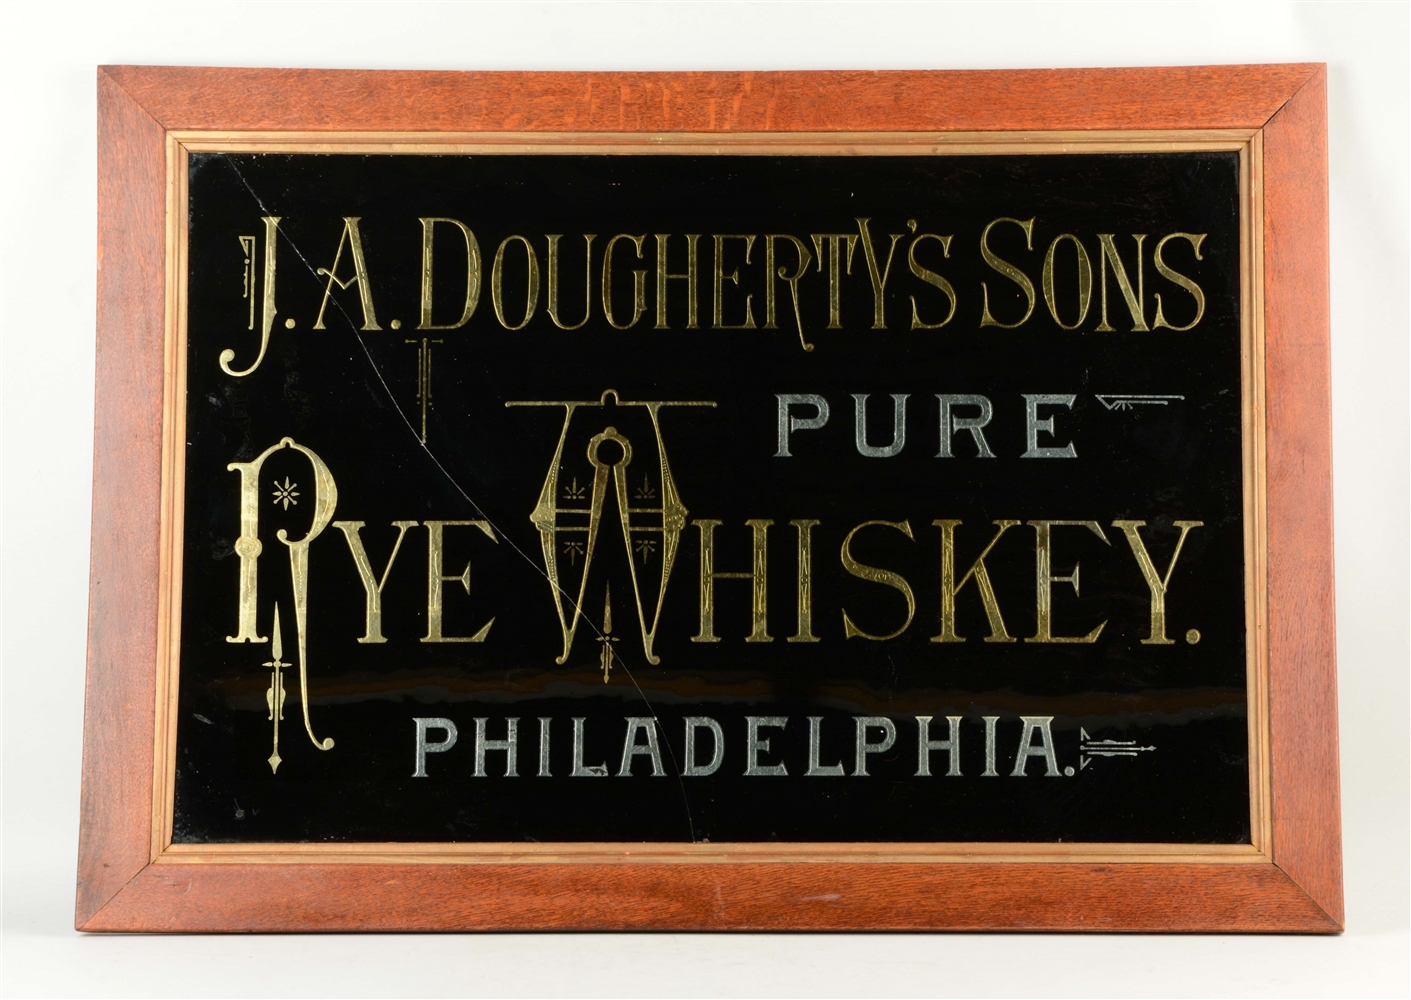 J.A. DOUGHERTYS SONS RYE WHISKEY REVERSE GLASS ADVERTISING SIGN.  